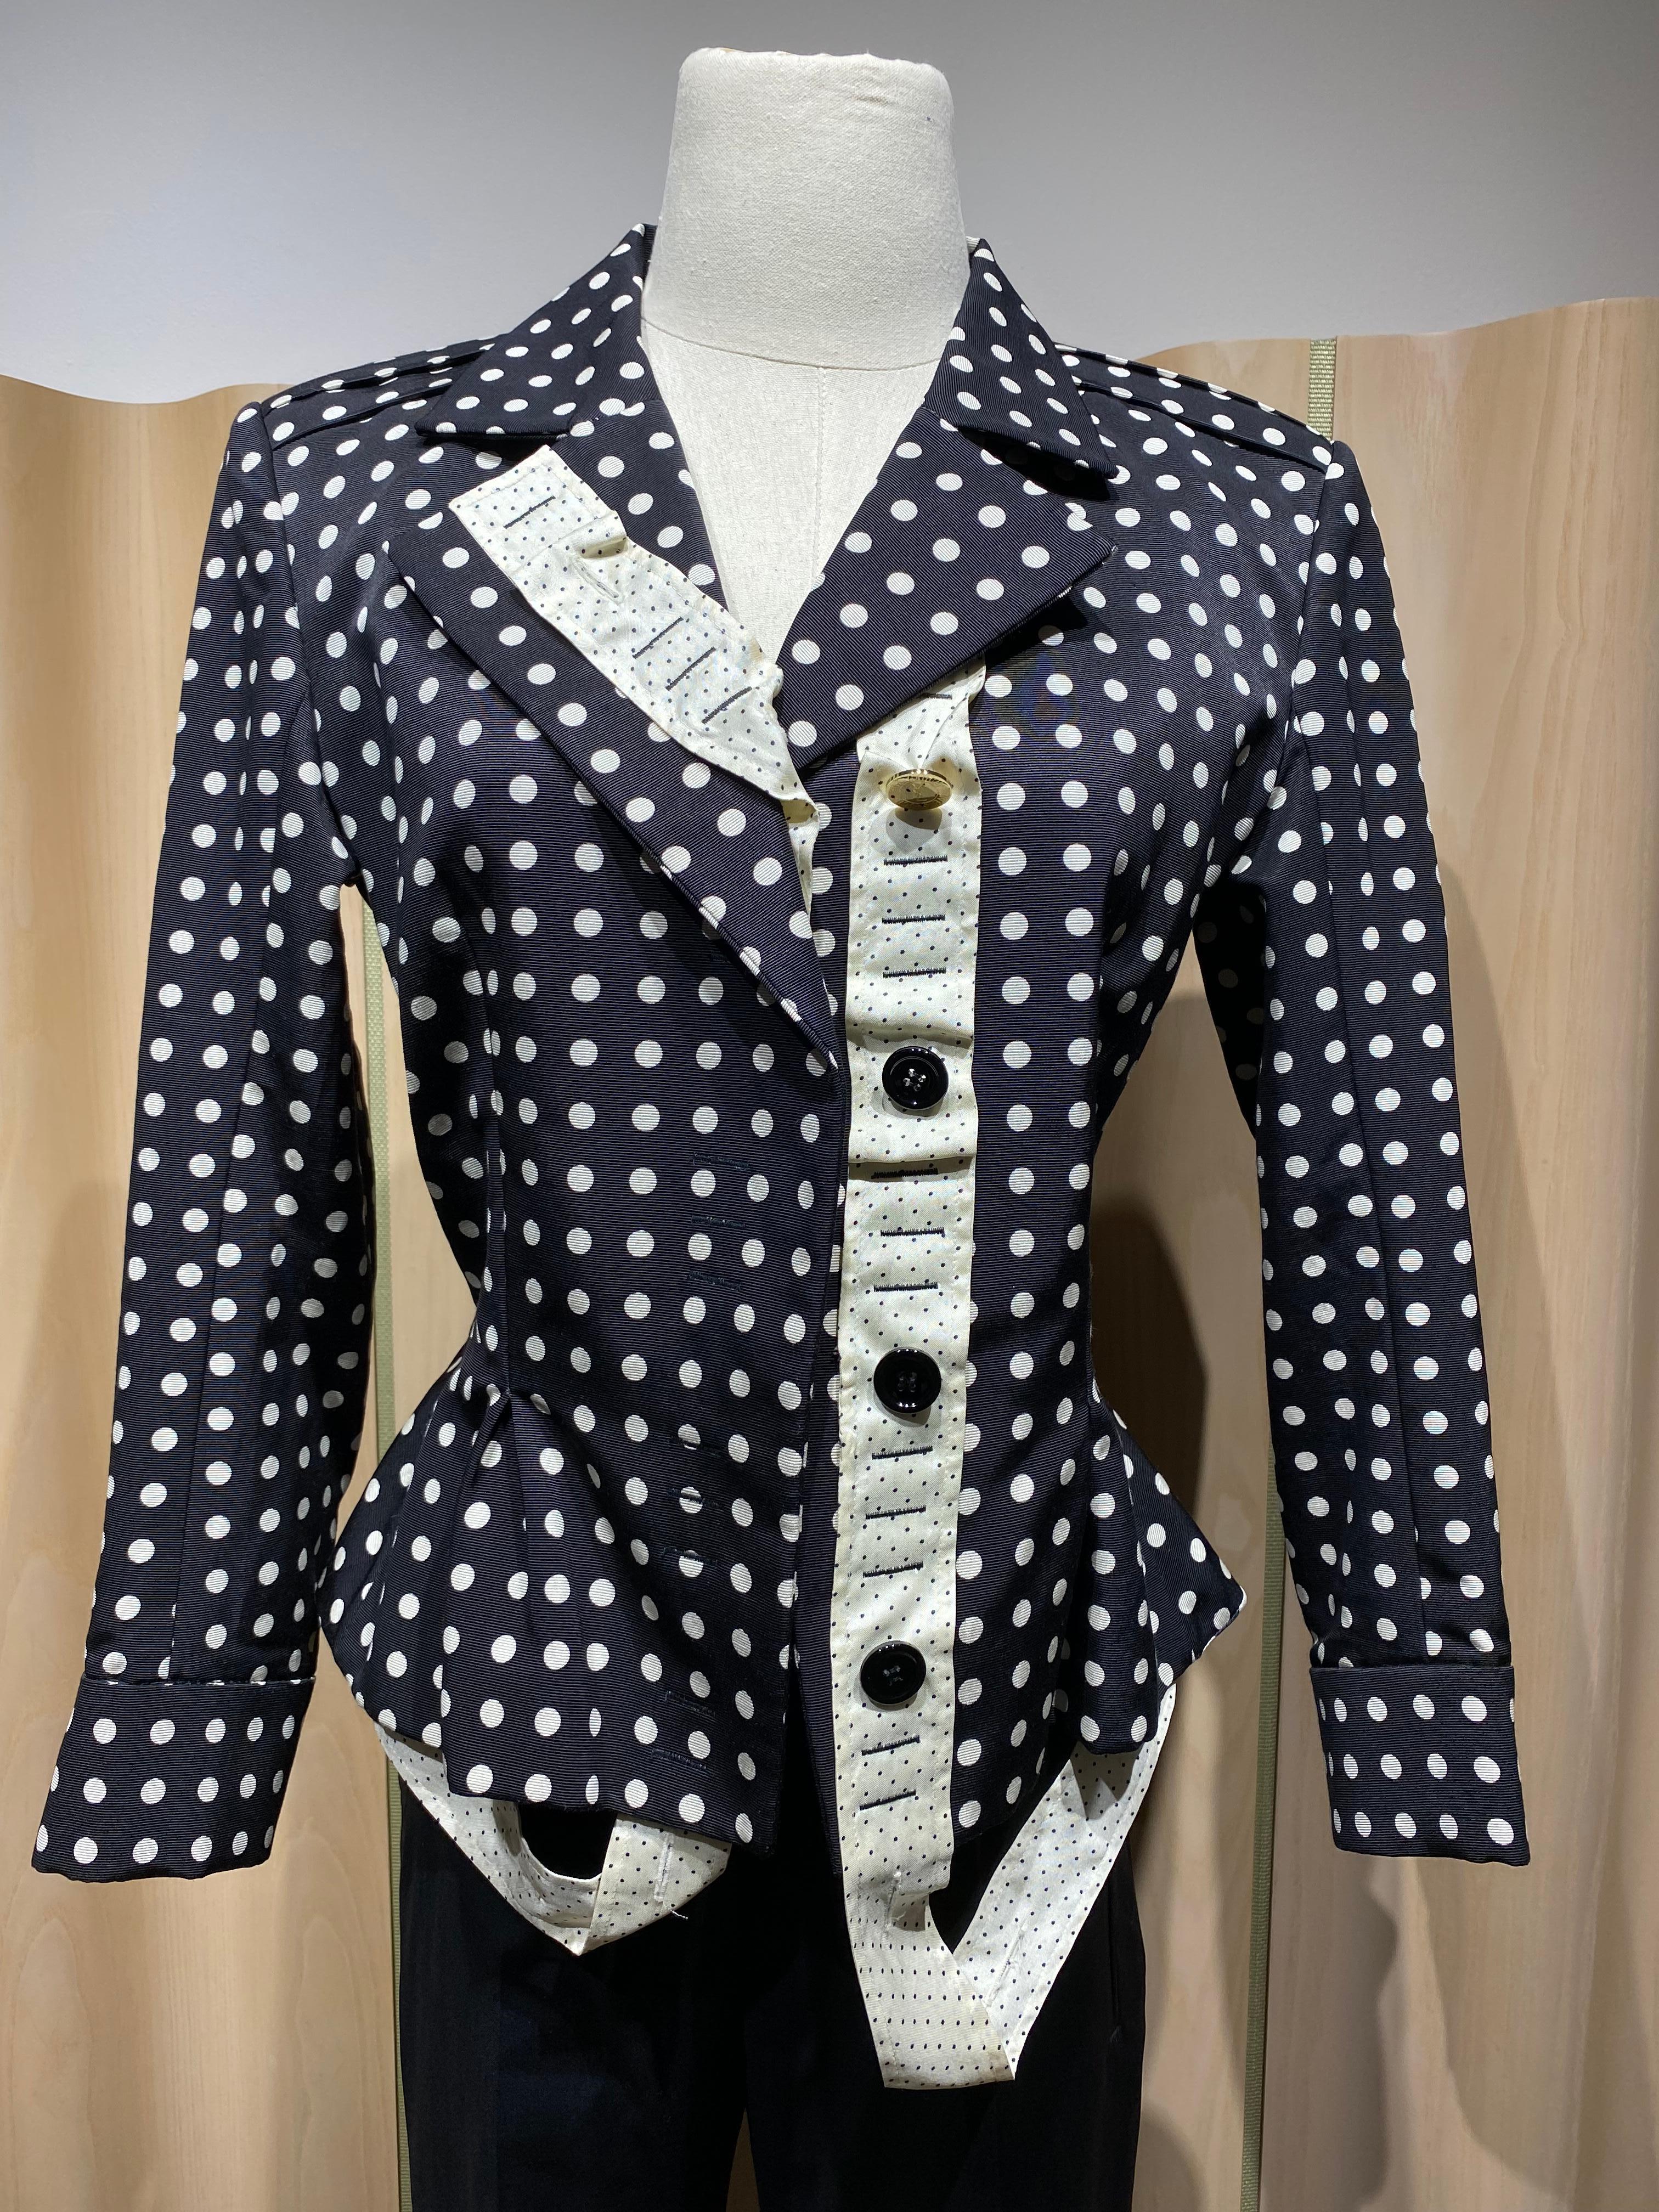 2005 Yves Saint Laurent rive gauche by Stefano Pilati Peplum polkadot Jacket /blazer pant suit.
Jacket is lined in polkadot silk fabric. The suits is in excellent condition.
Size: 36
Jacket Measurement :
Bust: 35” / Waist 28” / Hip: 34” / Sleeve: